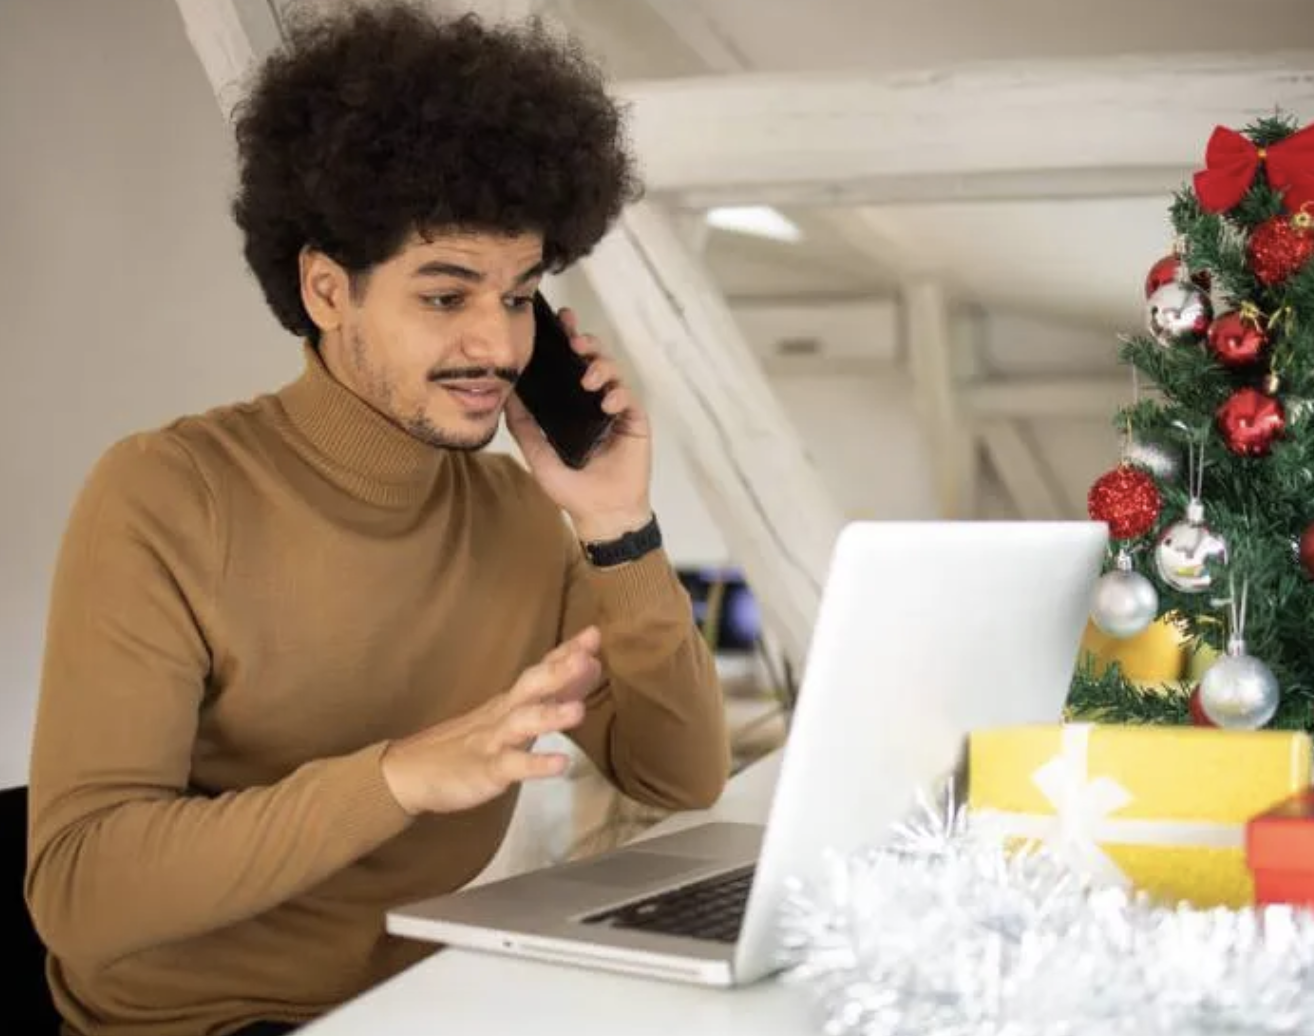 Stressed man talking on phone and looking at his laptop screen hoping he hasn't been scammed. A Christmas tree is in the background.